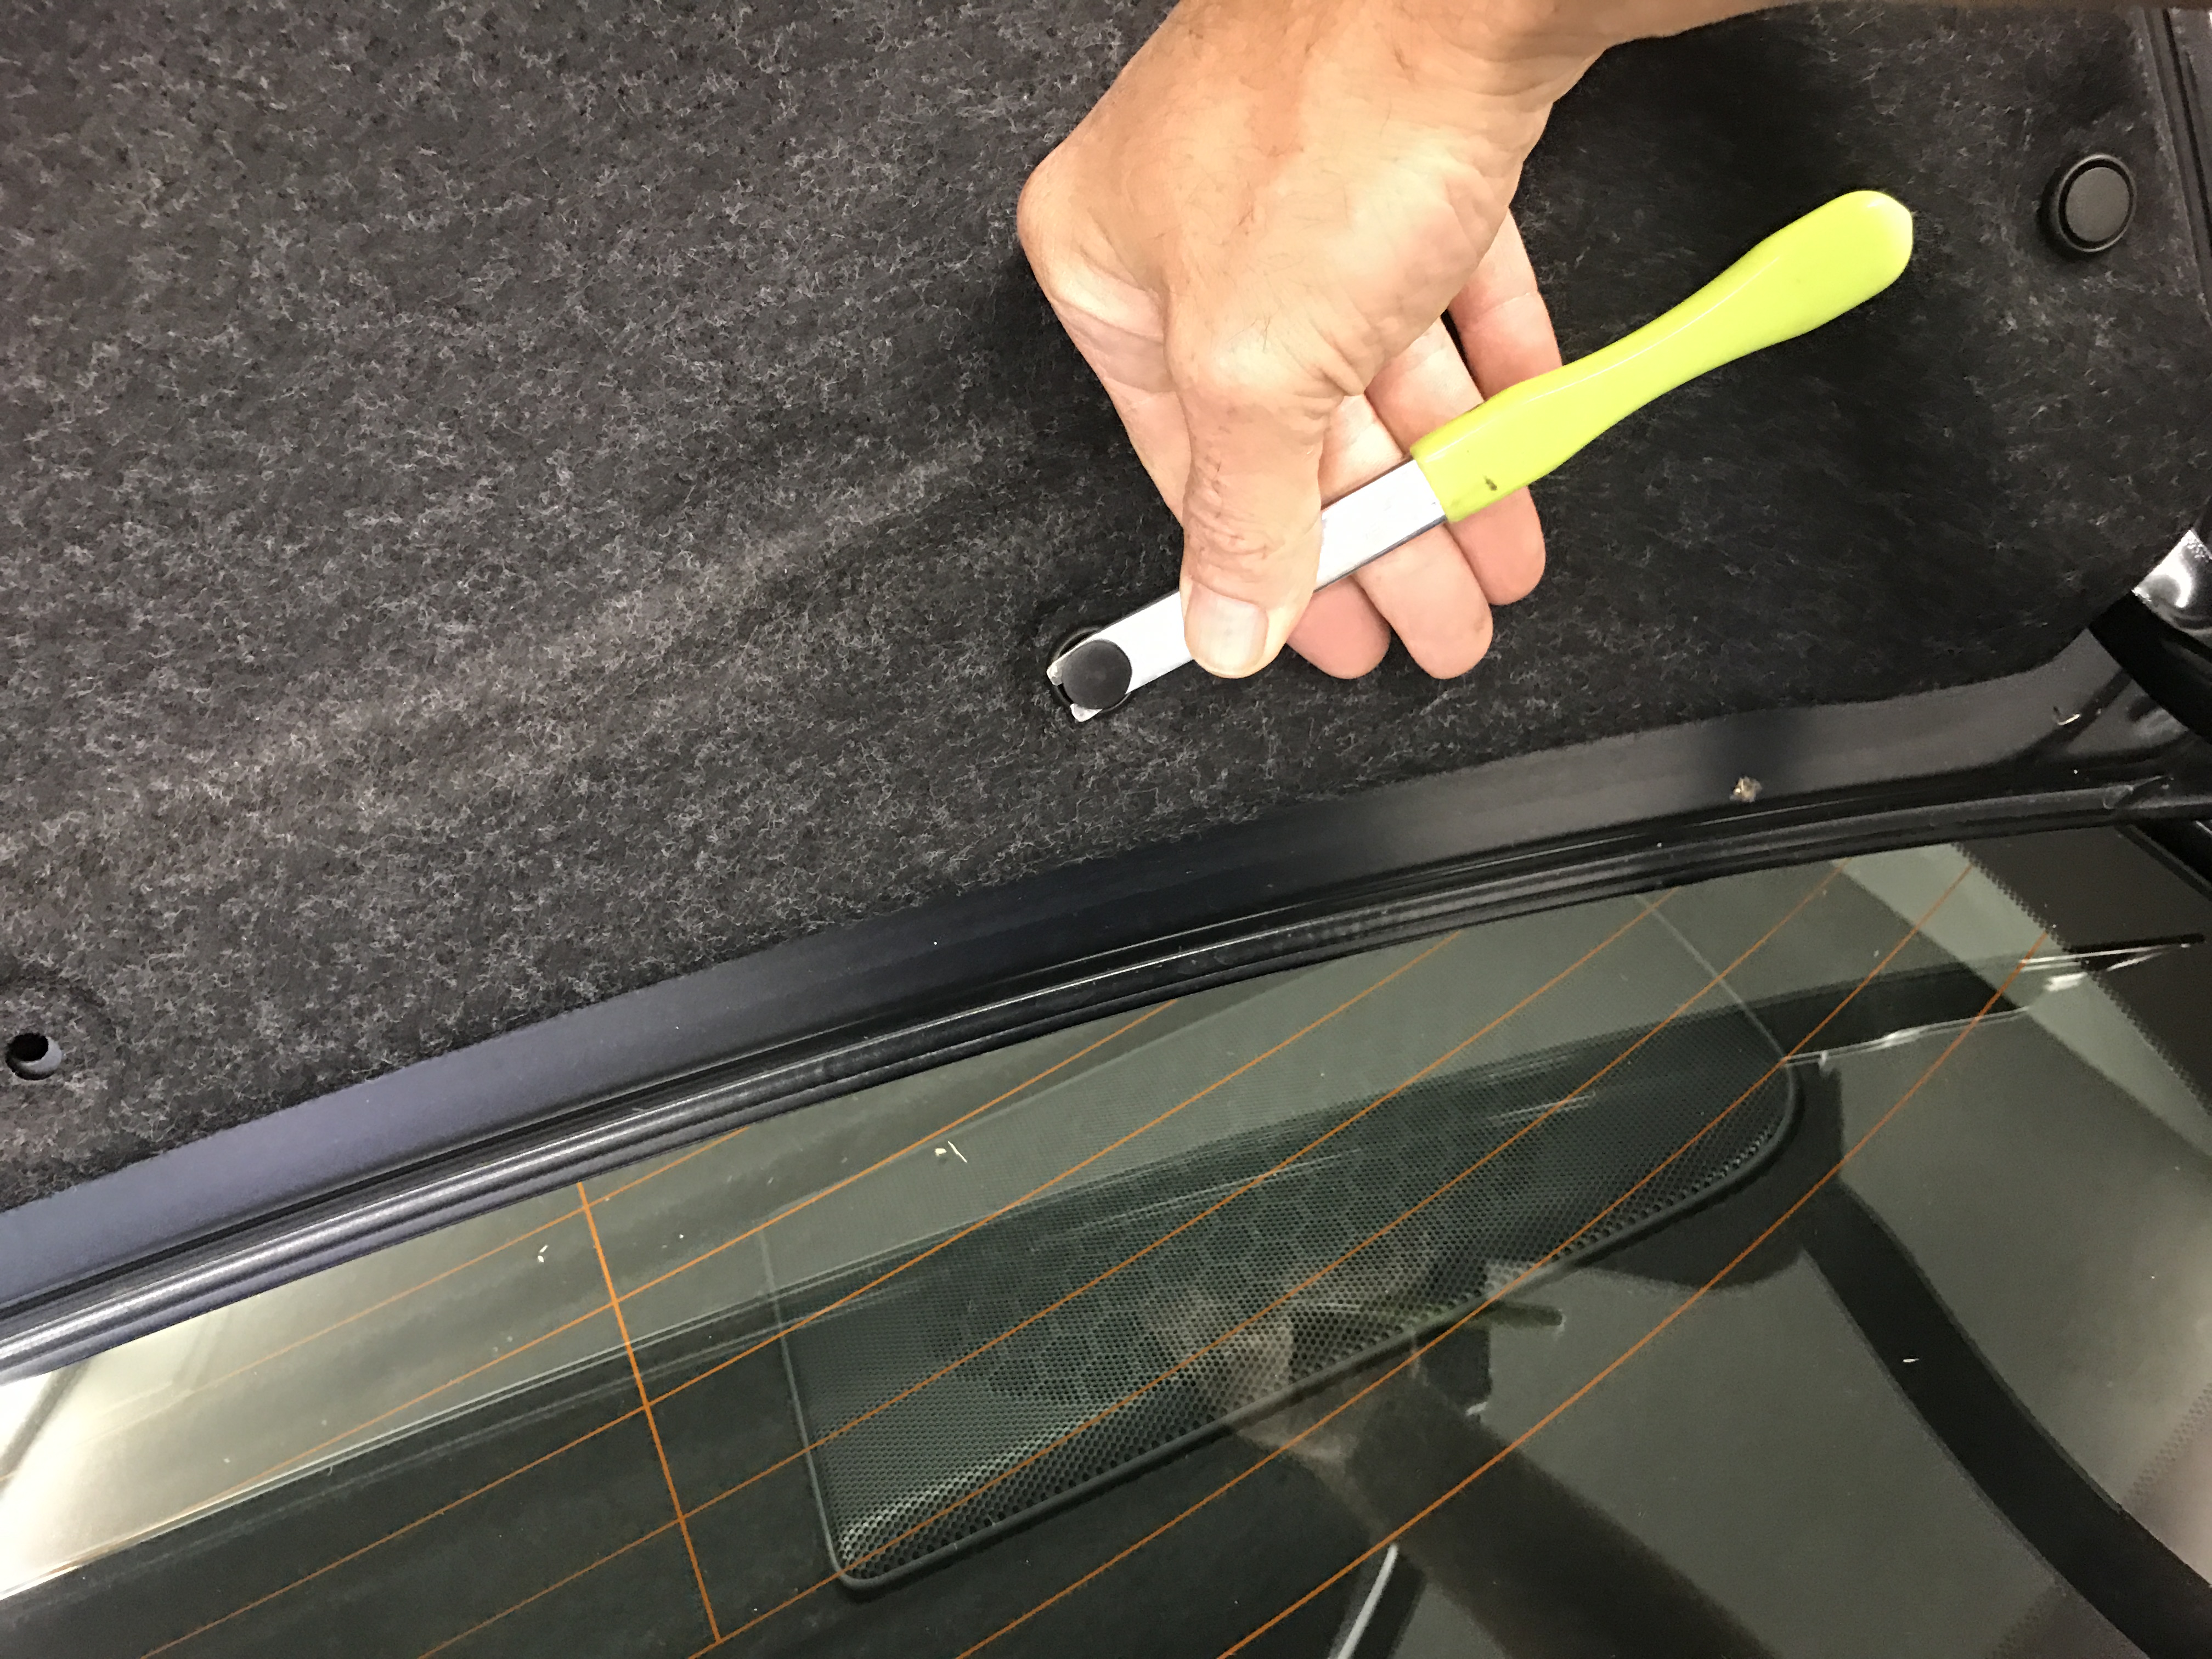 2011 Toyota Camry, Green Clip Removal Tool used in removing the deck (trunk) interior liner. Springfield, IL http://217dent.com